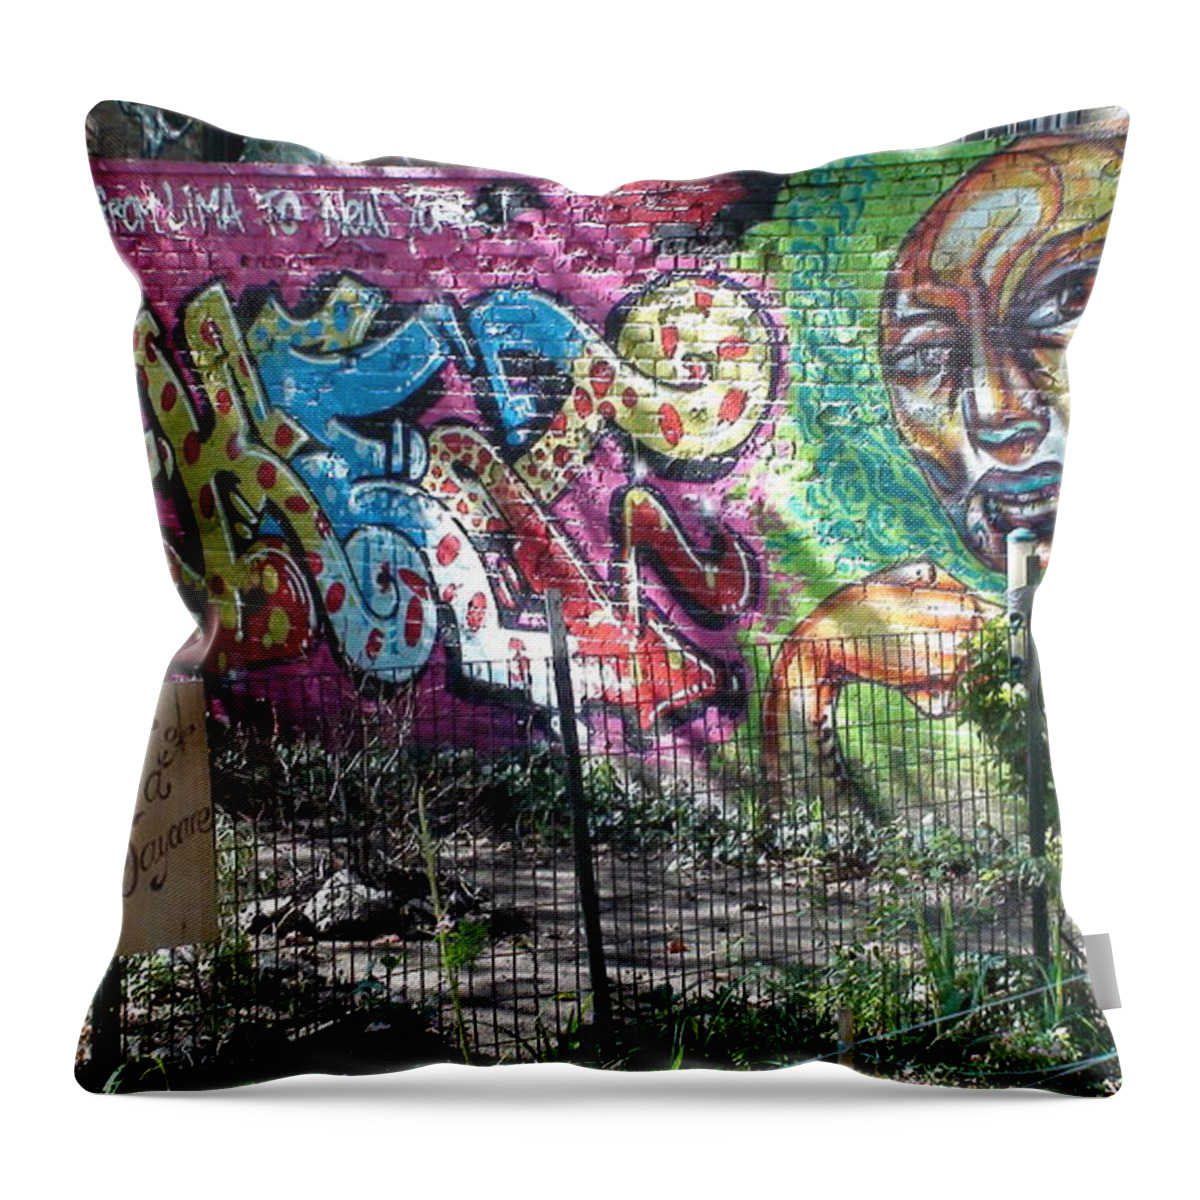 Inwood Throw Pillow featuring the photograph Isham Park Graffiti by Cole Thompson